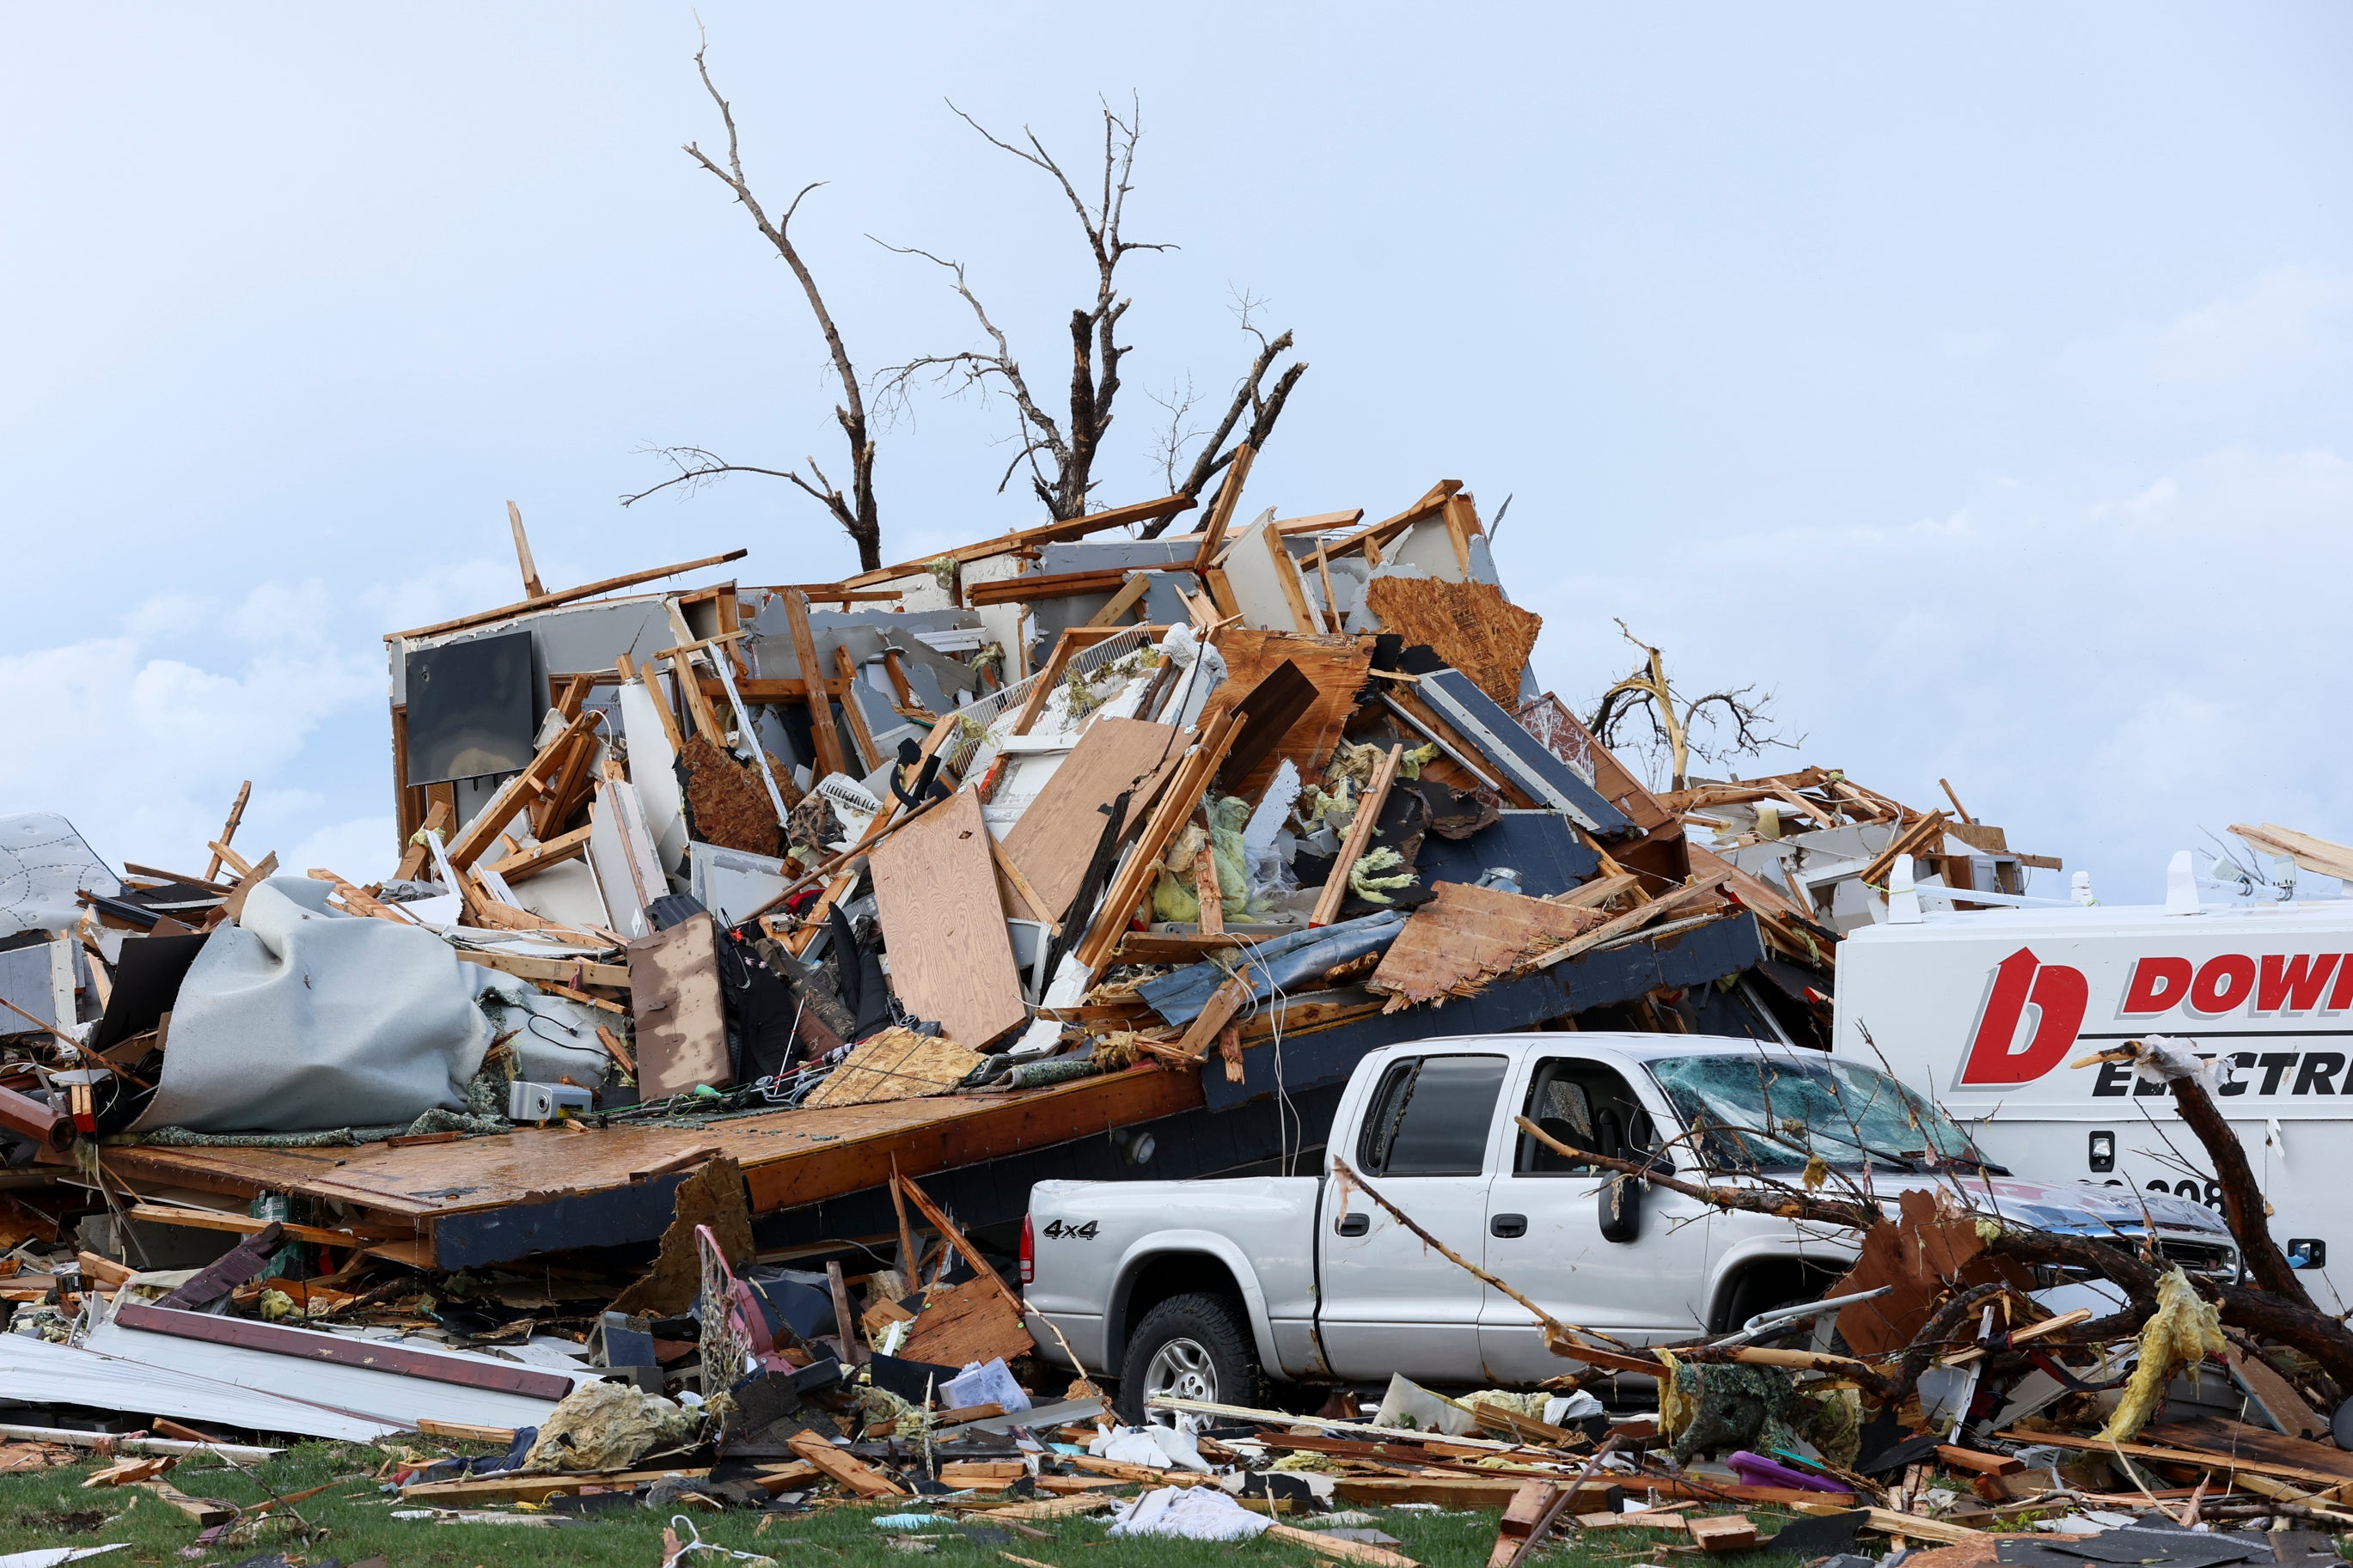 deadly tornadoes kill two, including child as they rip through oklahoma